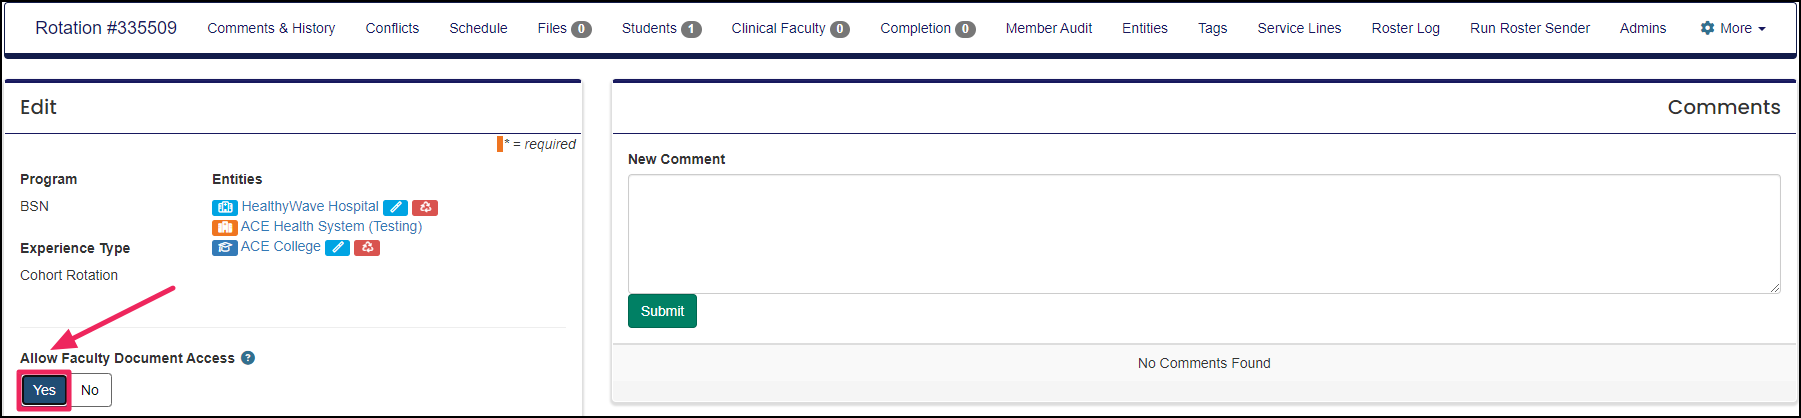 Image shows edit rotation page with an arrow pointing to faculty document access toggle.